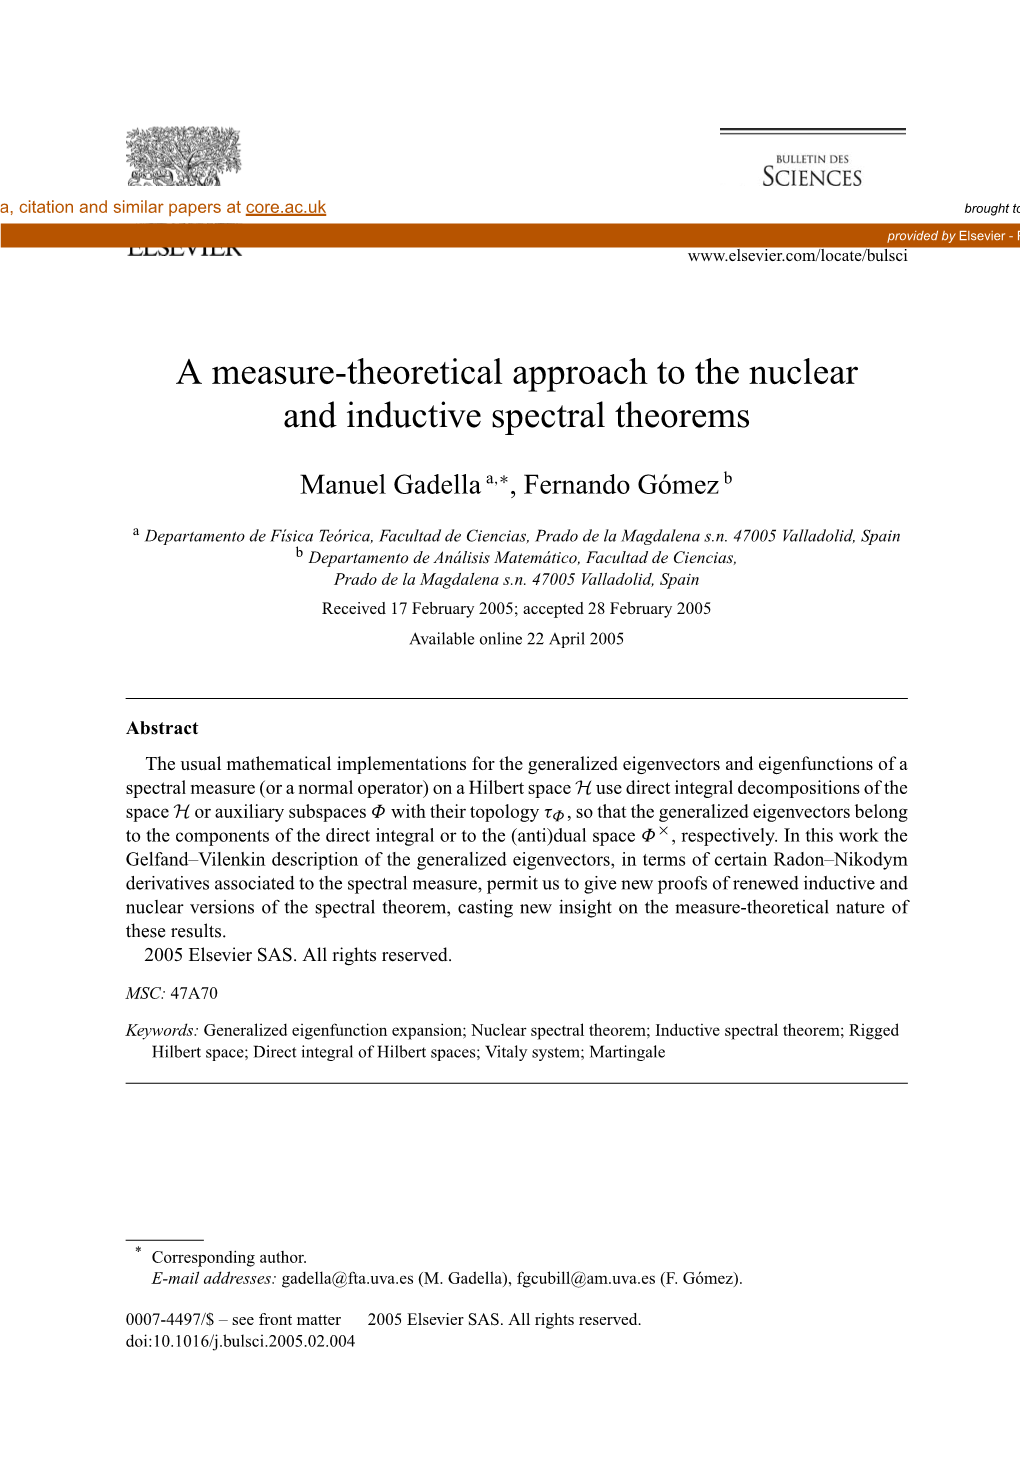 A Measure-Theoretical Approach to the Nuclear and Inductive Spectral Theorems